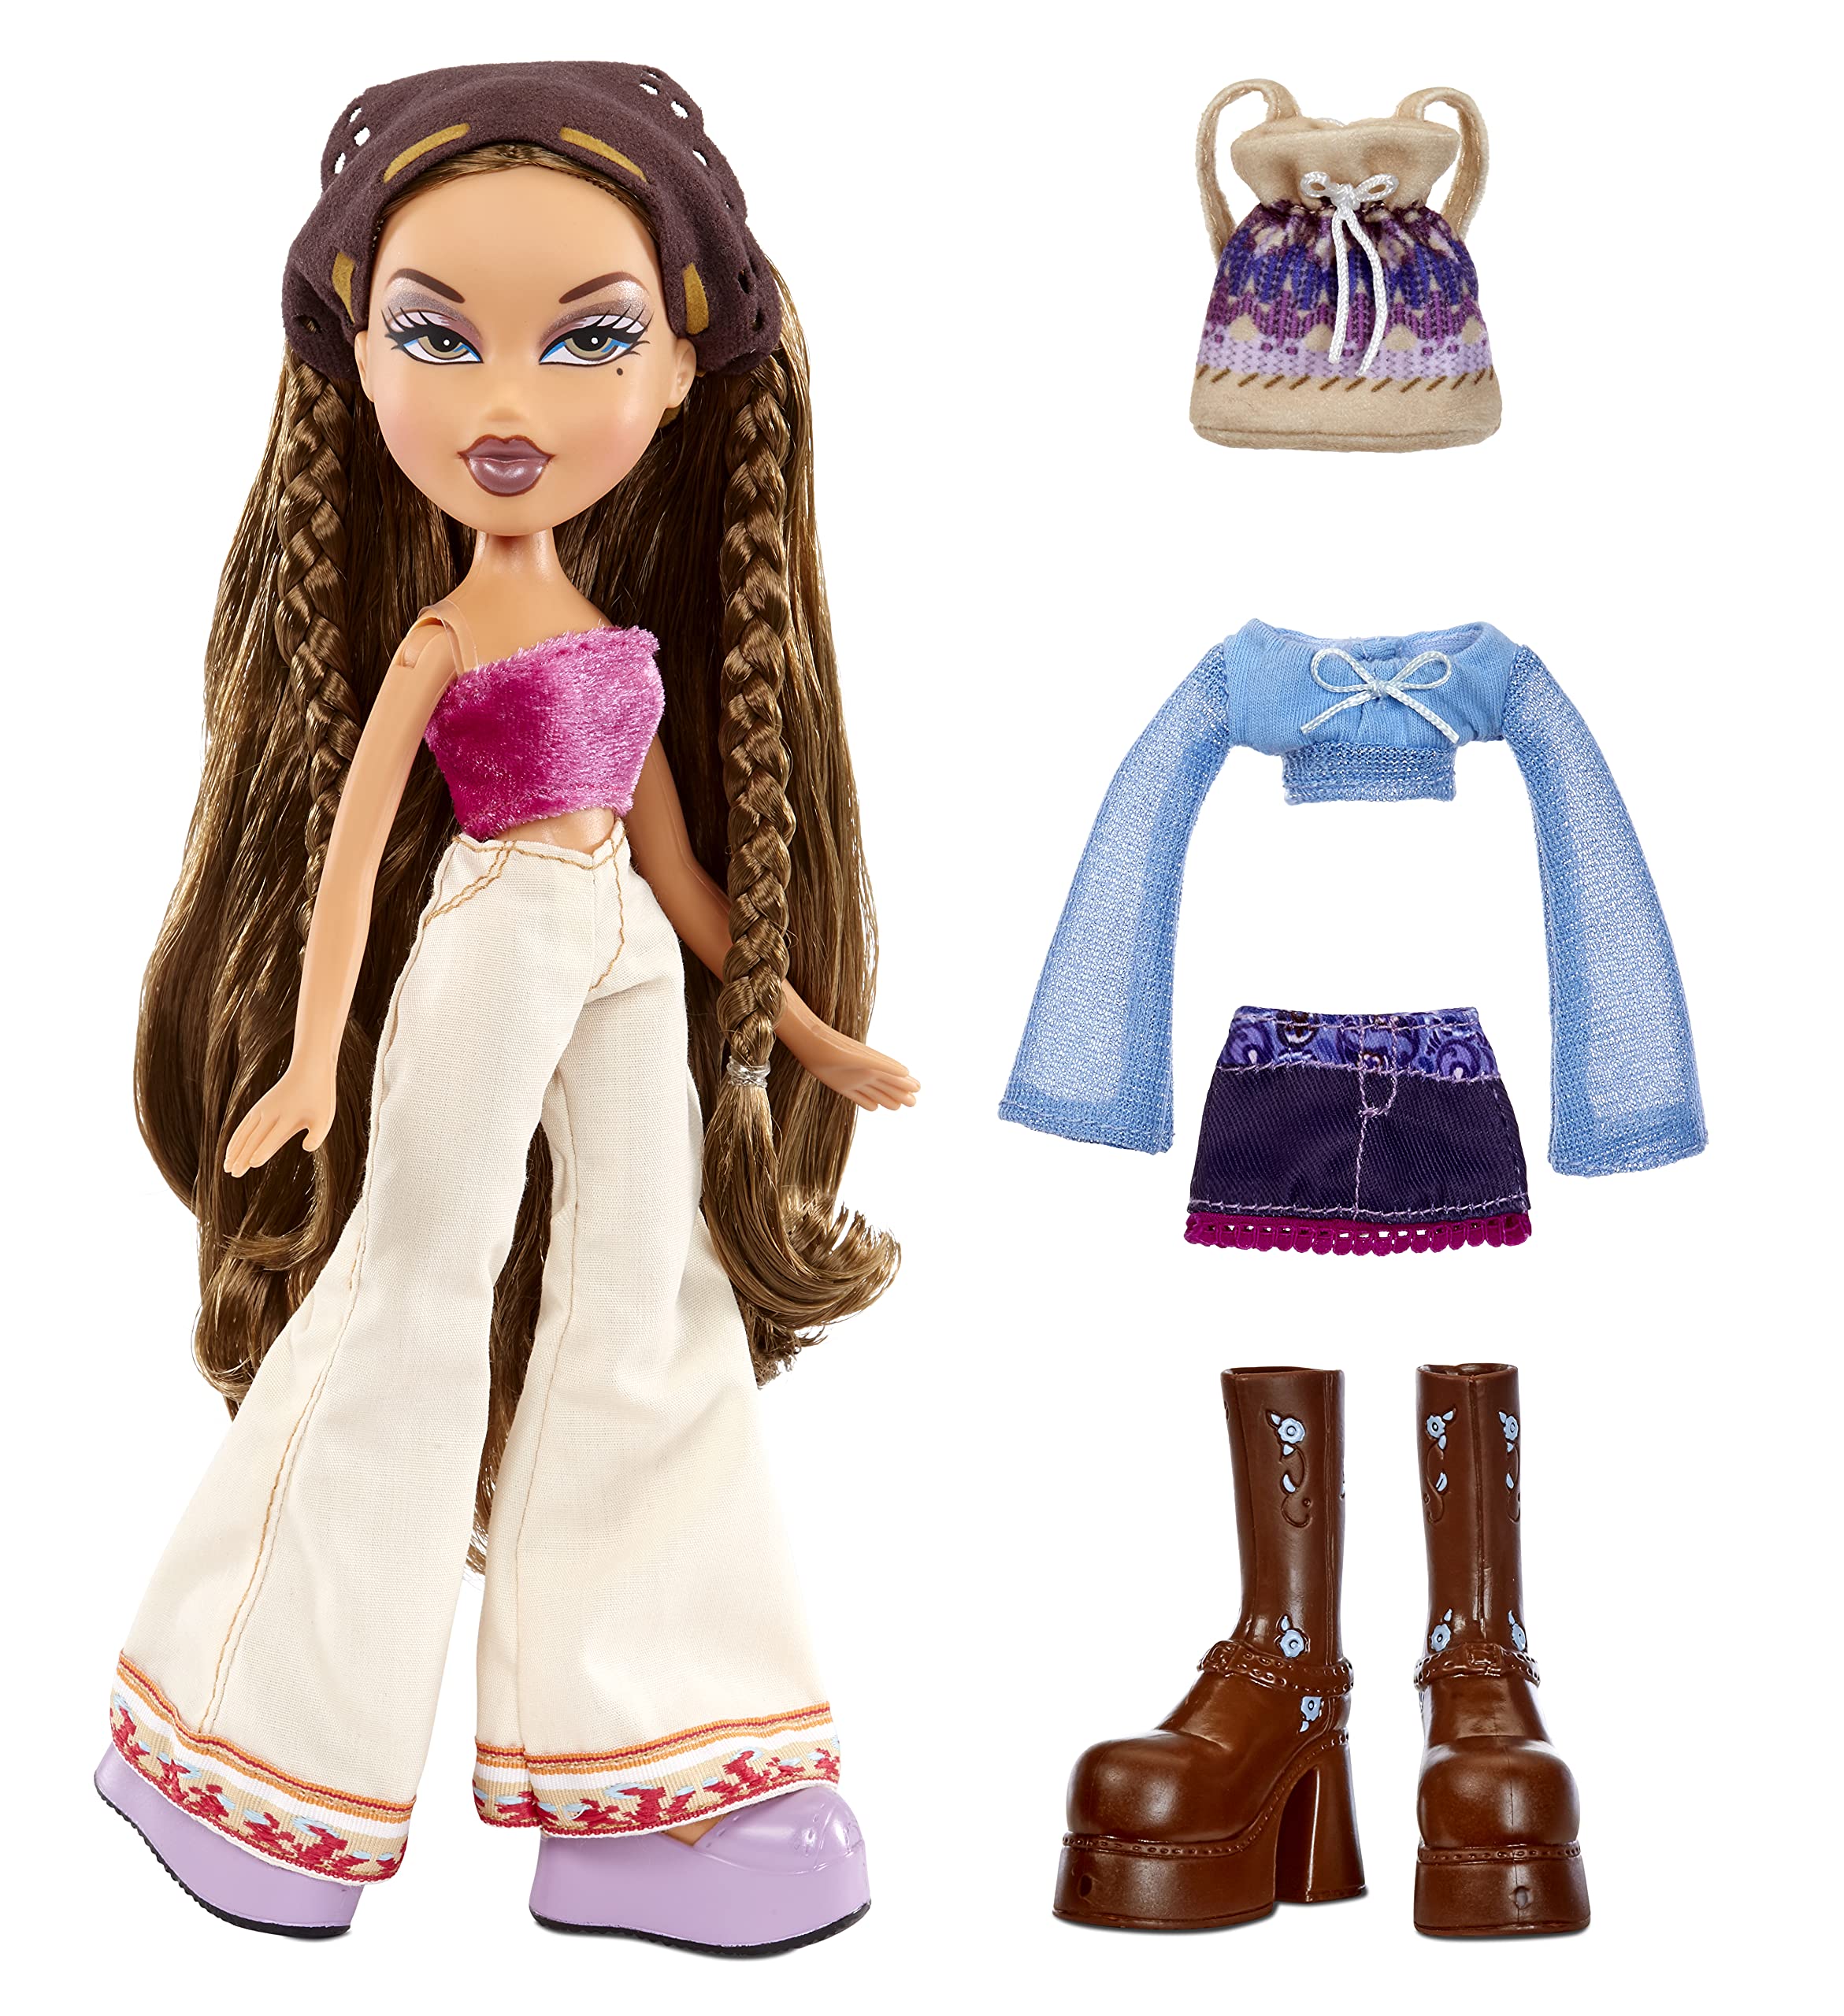 Bratz 20 Yearz Special Anniversary Edition Original Fashion Doll Yasmin with Accessories and Holographic Poster | Collectible Doll | For Collector Adults and Kids of All Ages